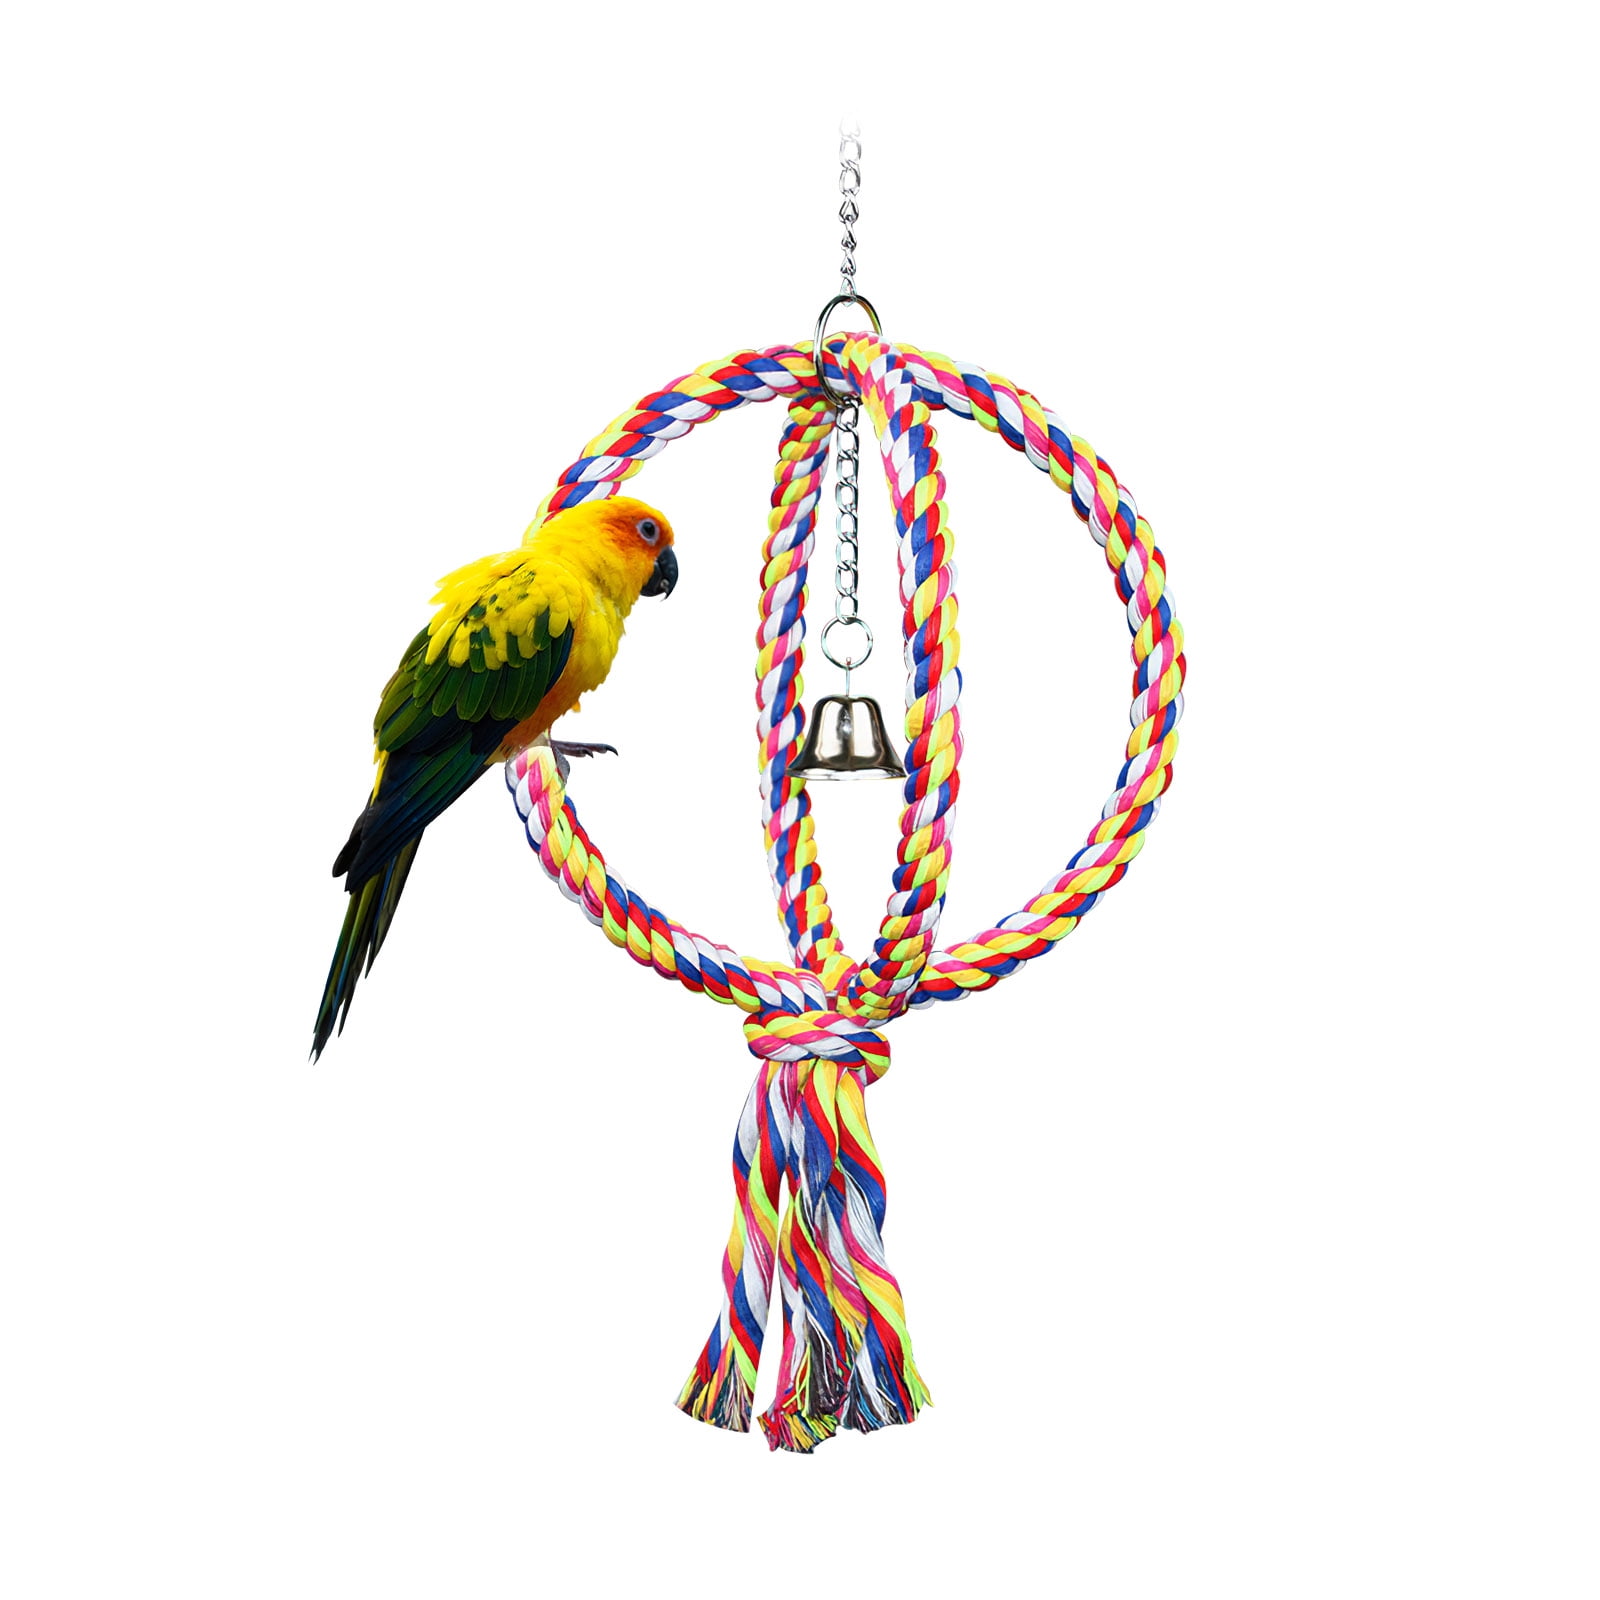 Bird Swing Perch Ring Design Colorful Cotton Rope Ring Toy Cage Toys Hanging Decor for Parrot Budgie Parakeet Cockatiel L 1PC